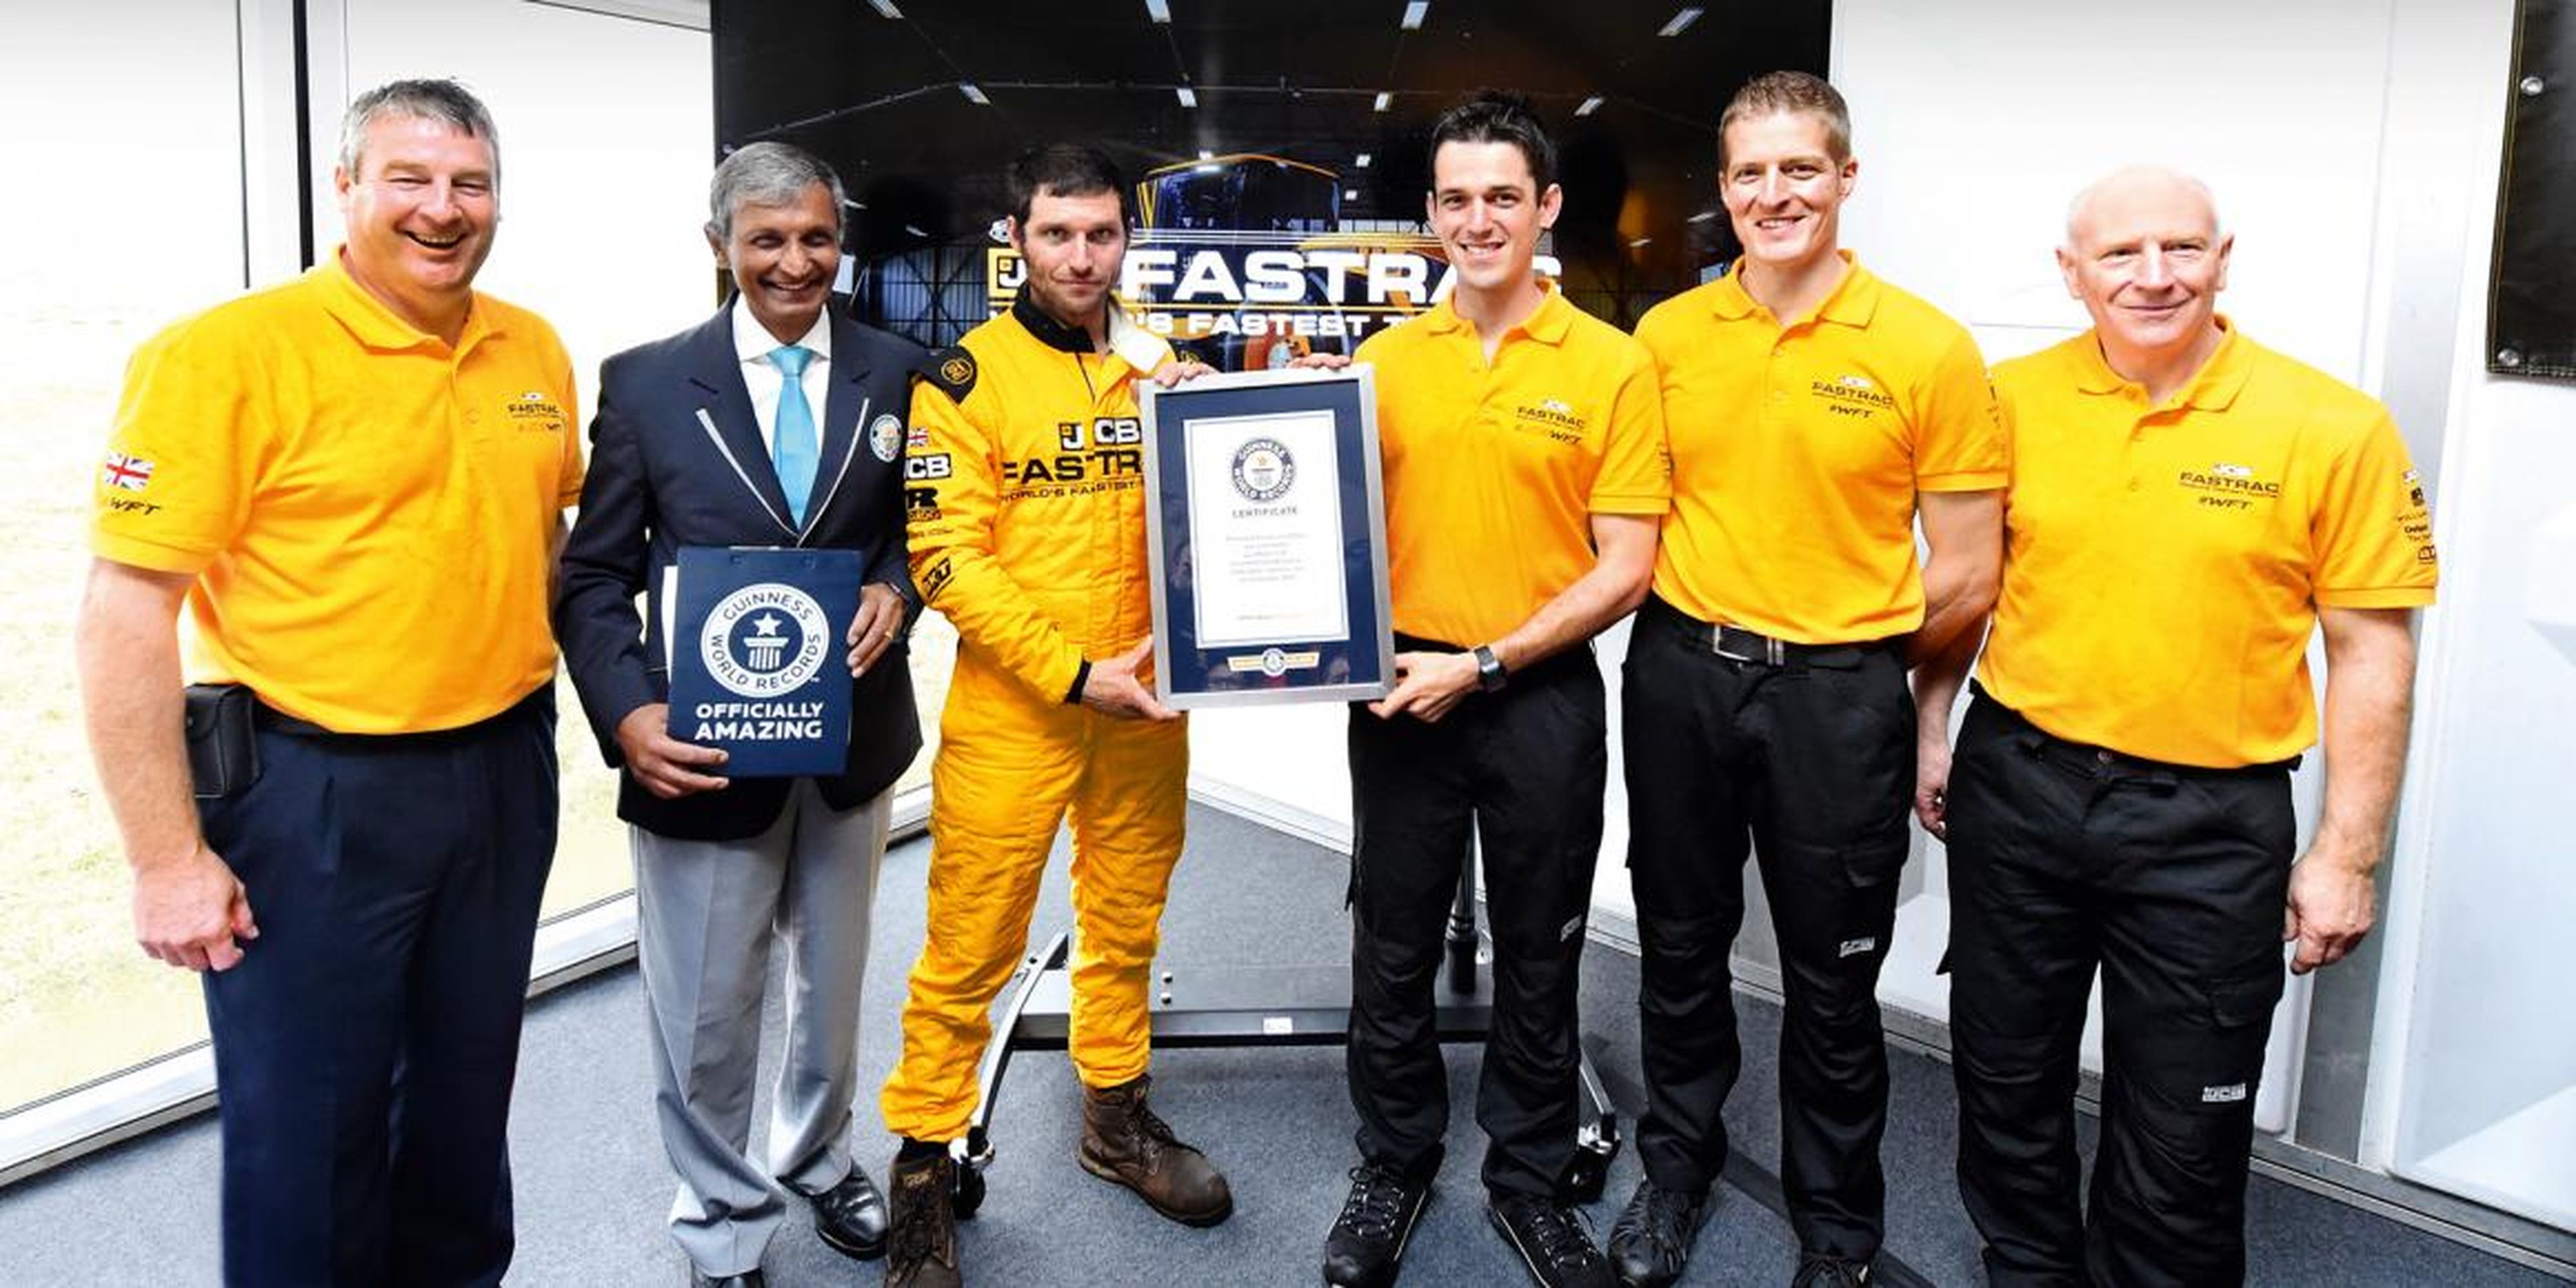 The JCB team was originally aiming for 150 mph. The tractor hit 153.77 while "on its way to establishing the record," according to JCB. However, the speed record sanctioned by Guinness World Records is still 135.91.